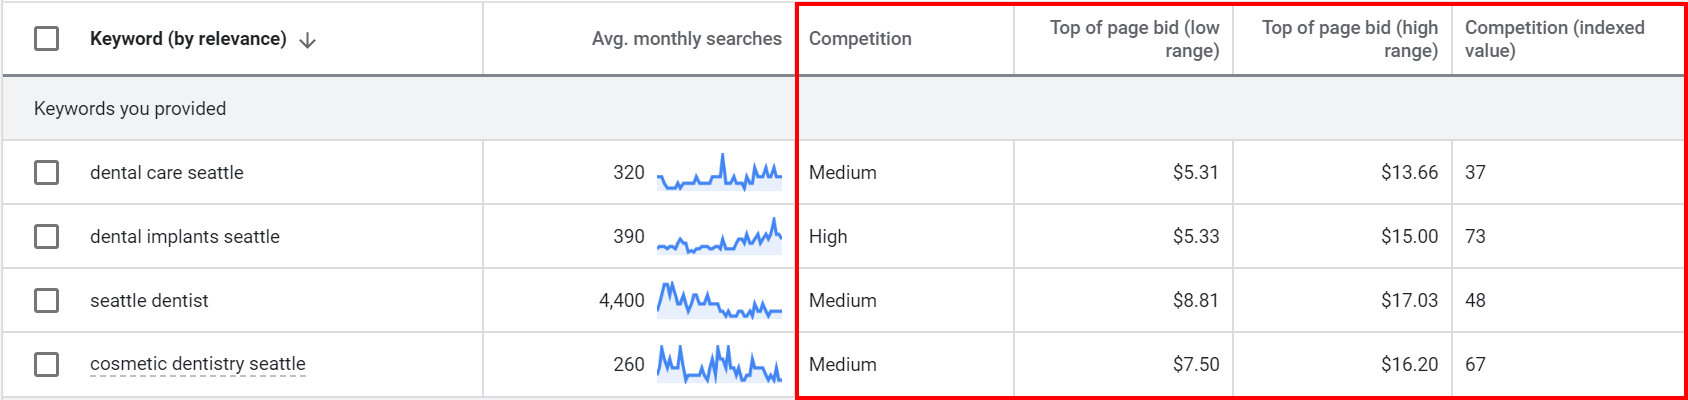 Seo Keyword Research Competition